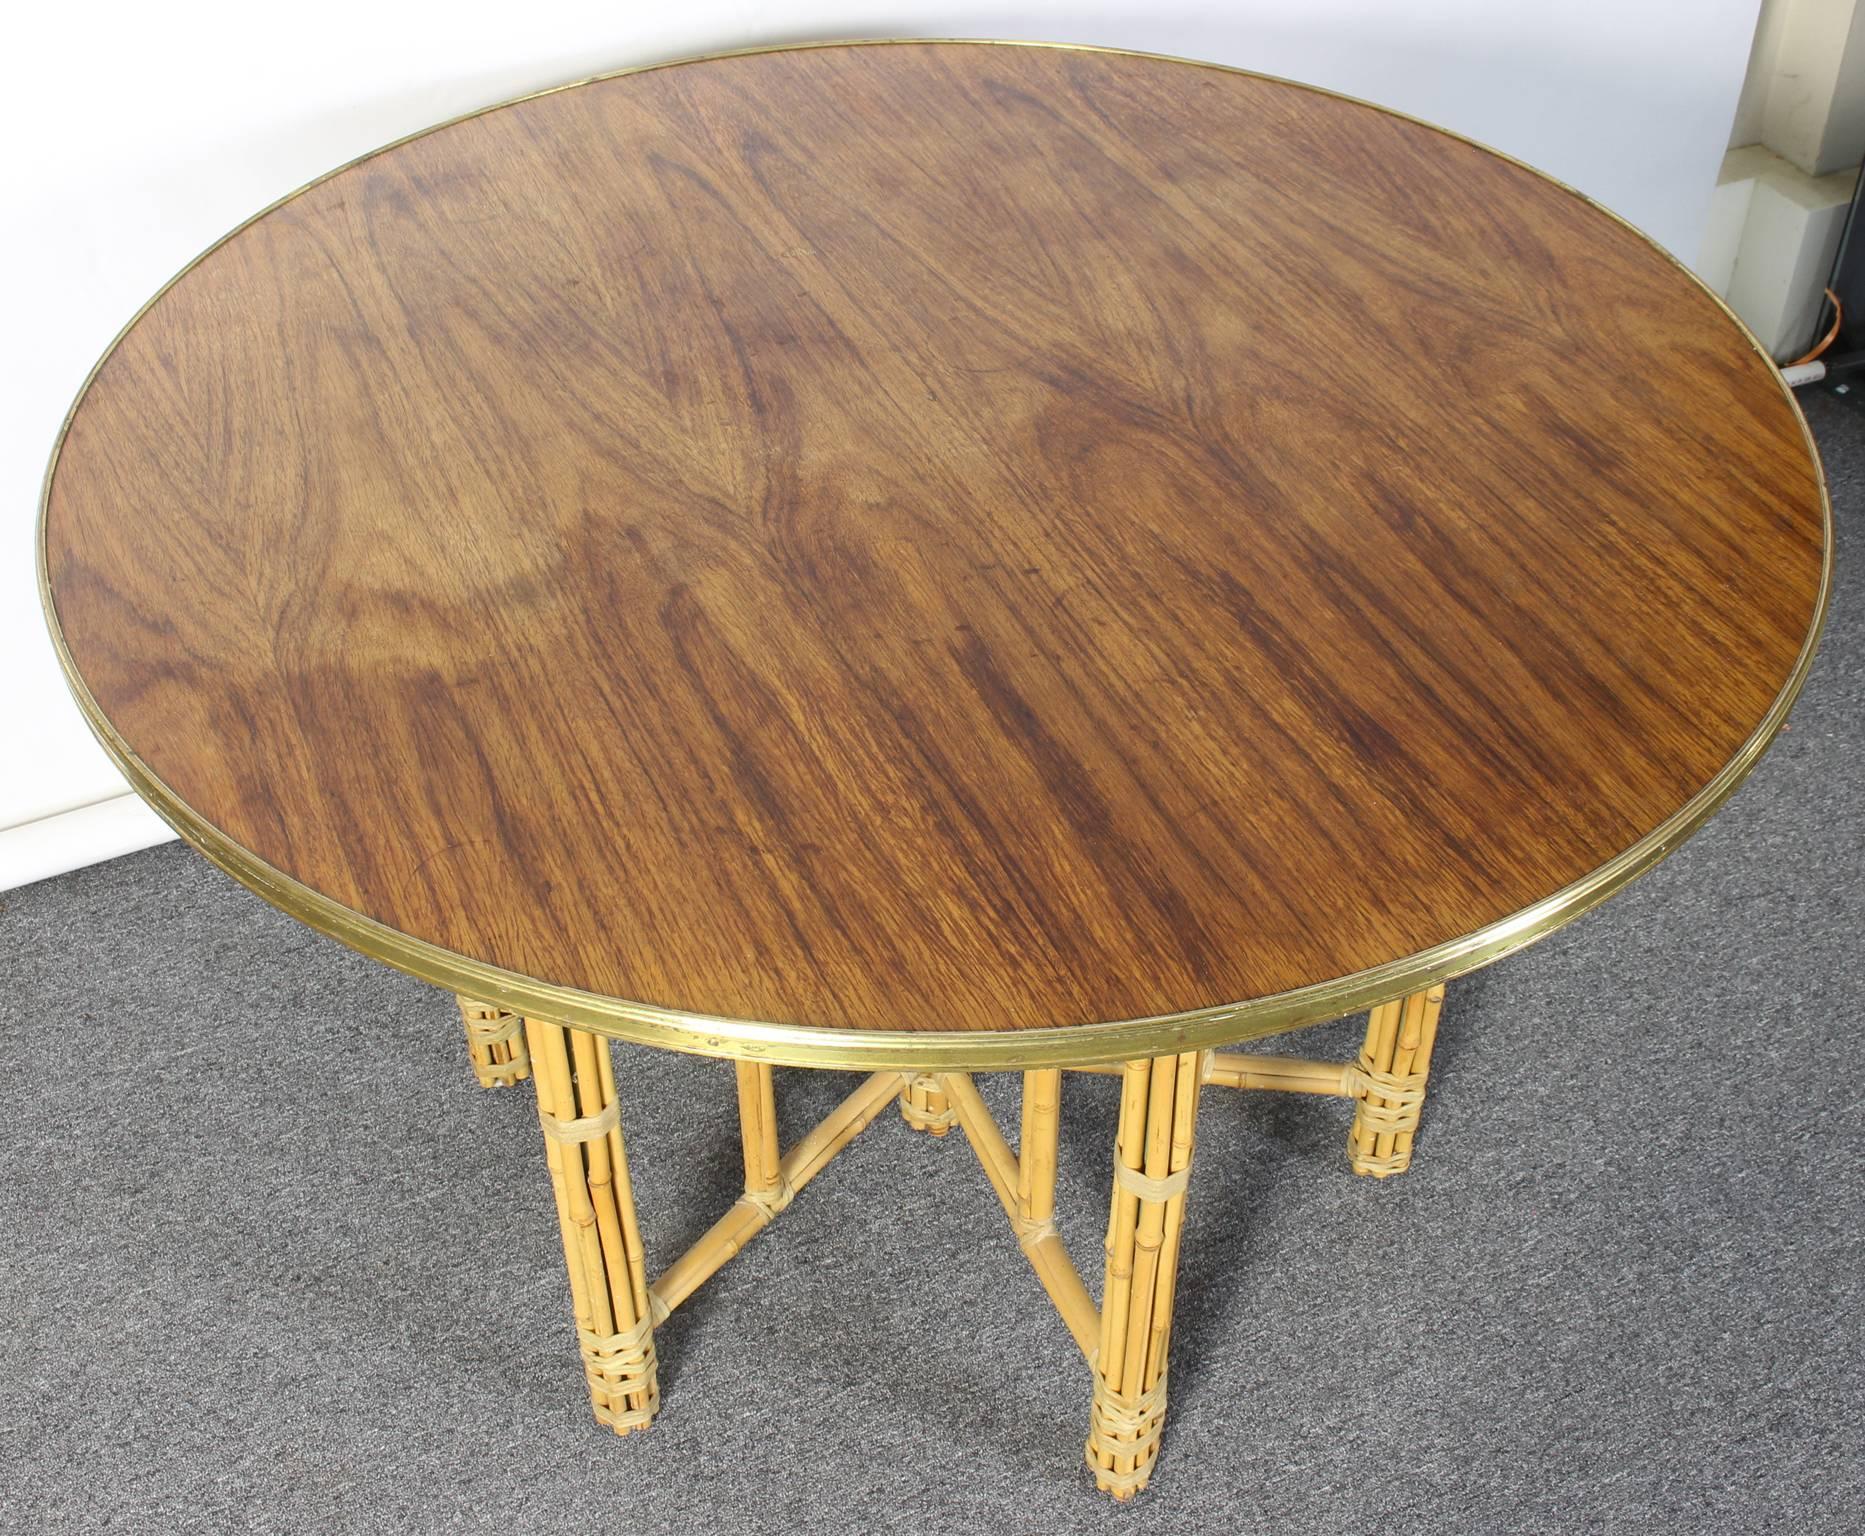 A mid-20th C. McGuire style round dining/center table with brass bound rosewood top and steel reinforced bundled bamboo base.  